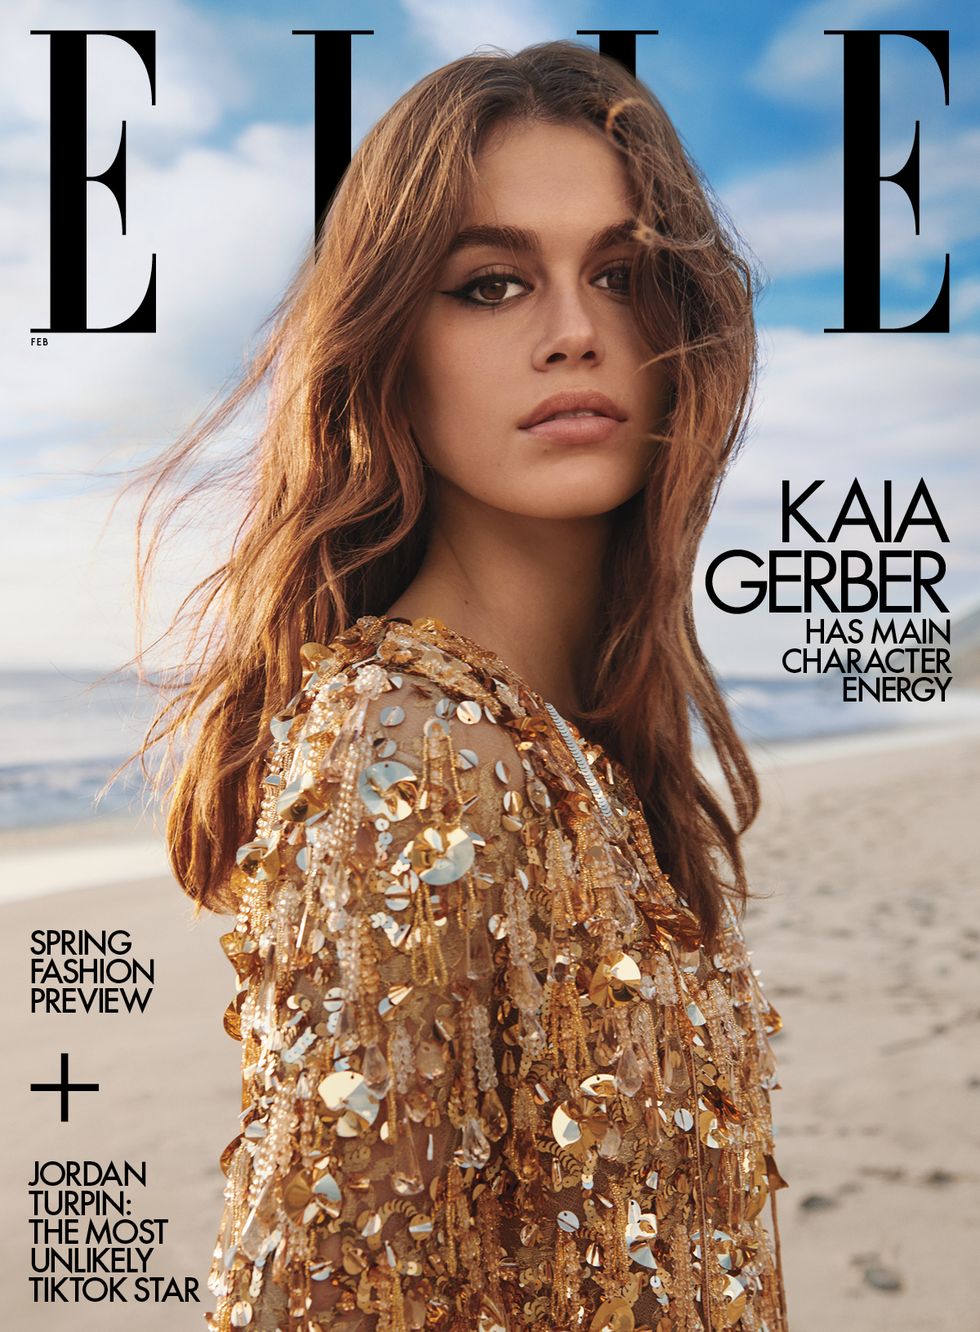 Kaia Gerber on Acting, Modeling, Mental Health and Her Book Club